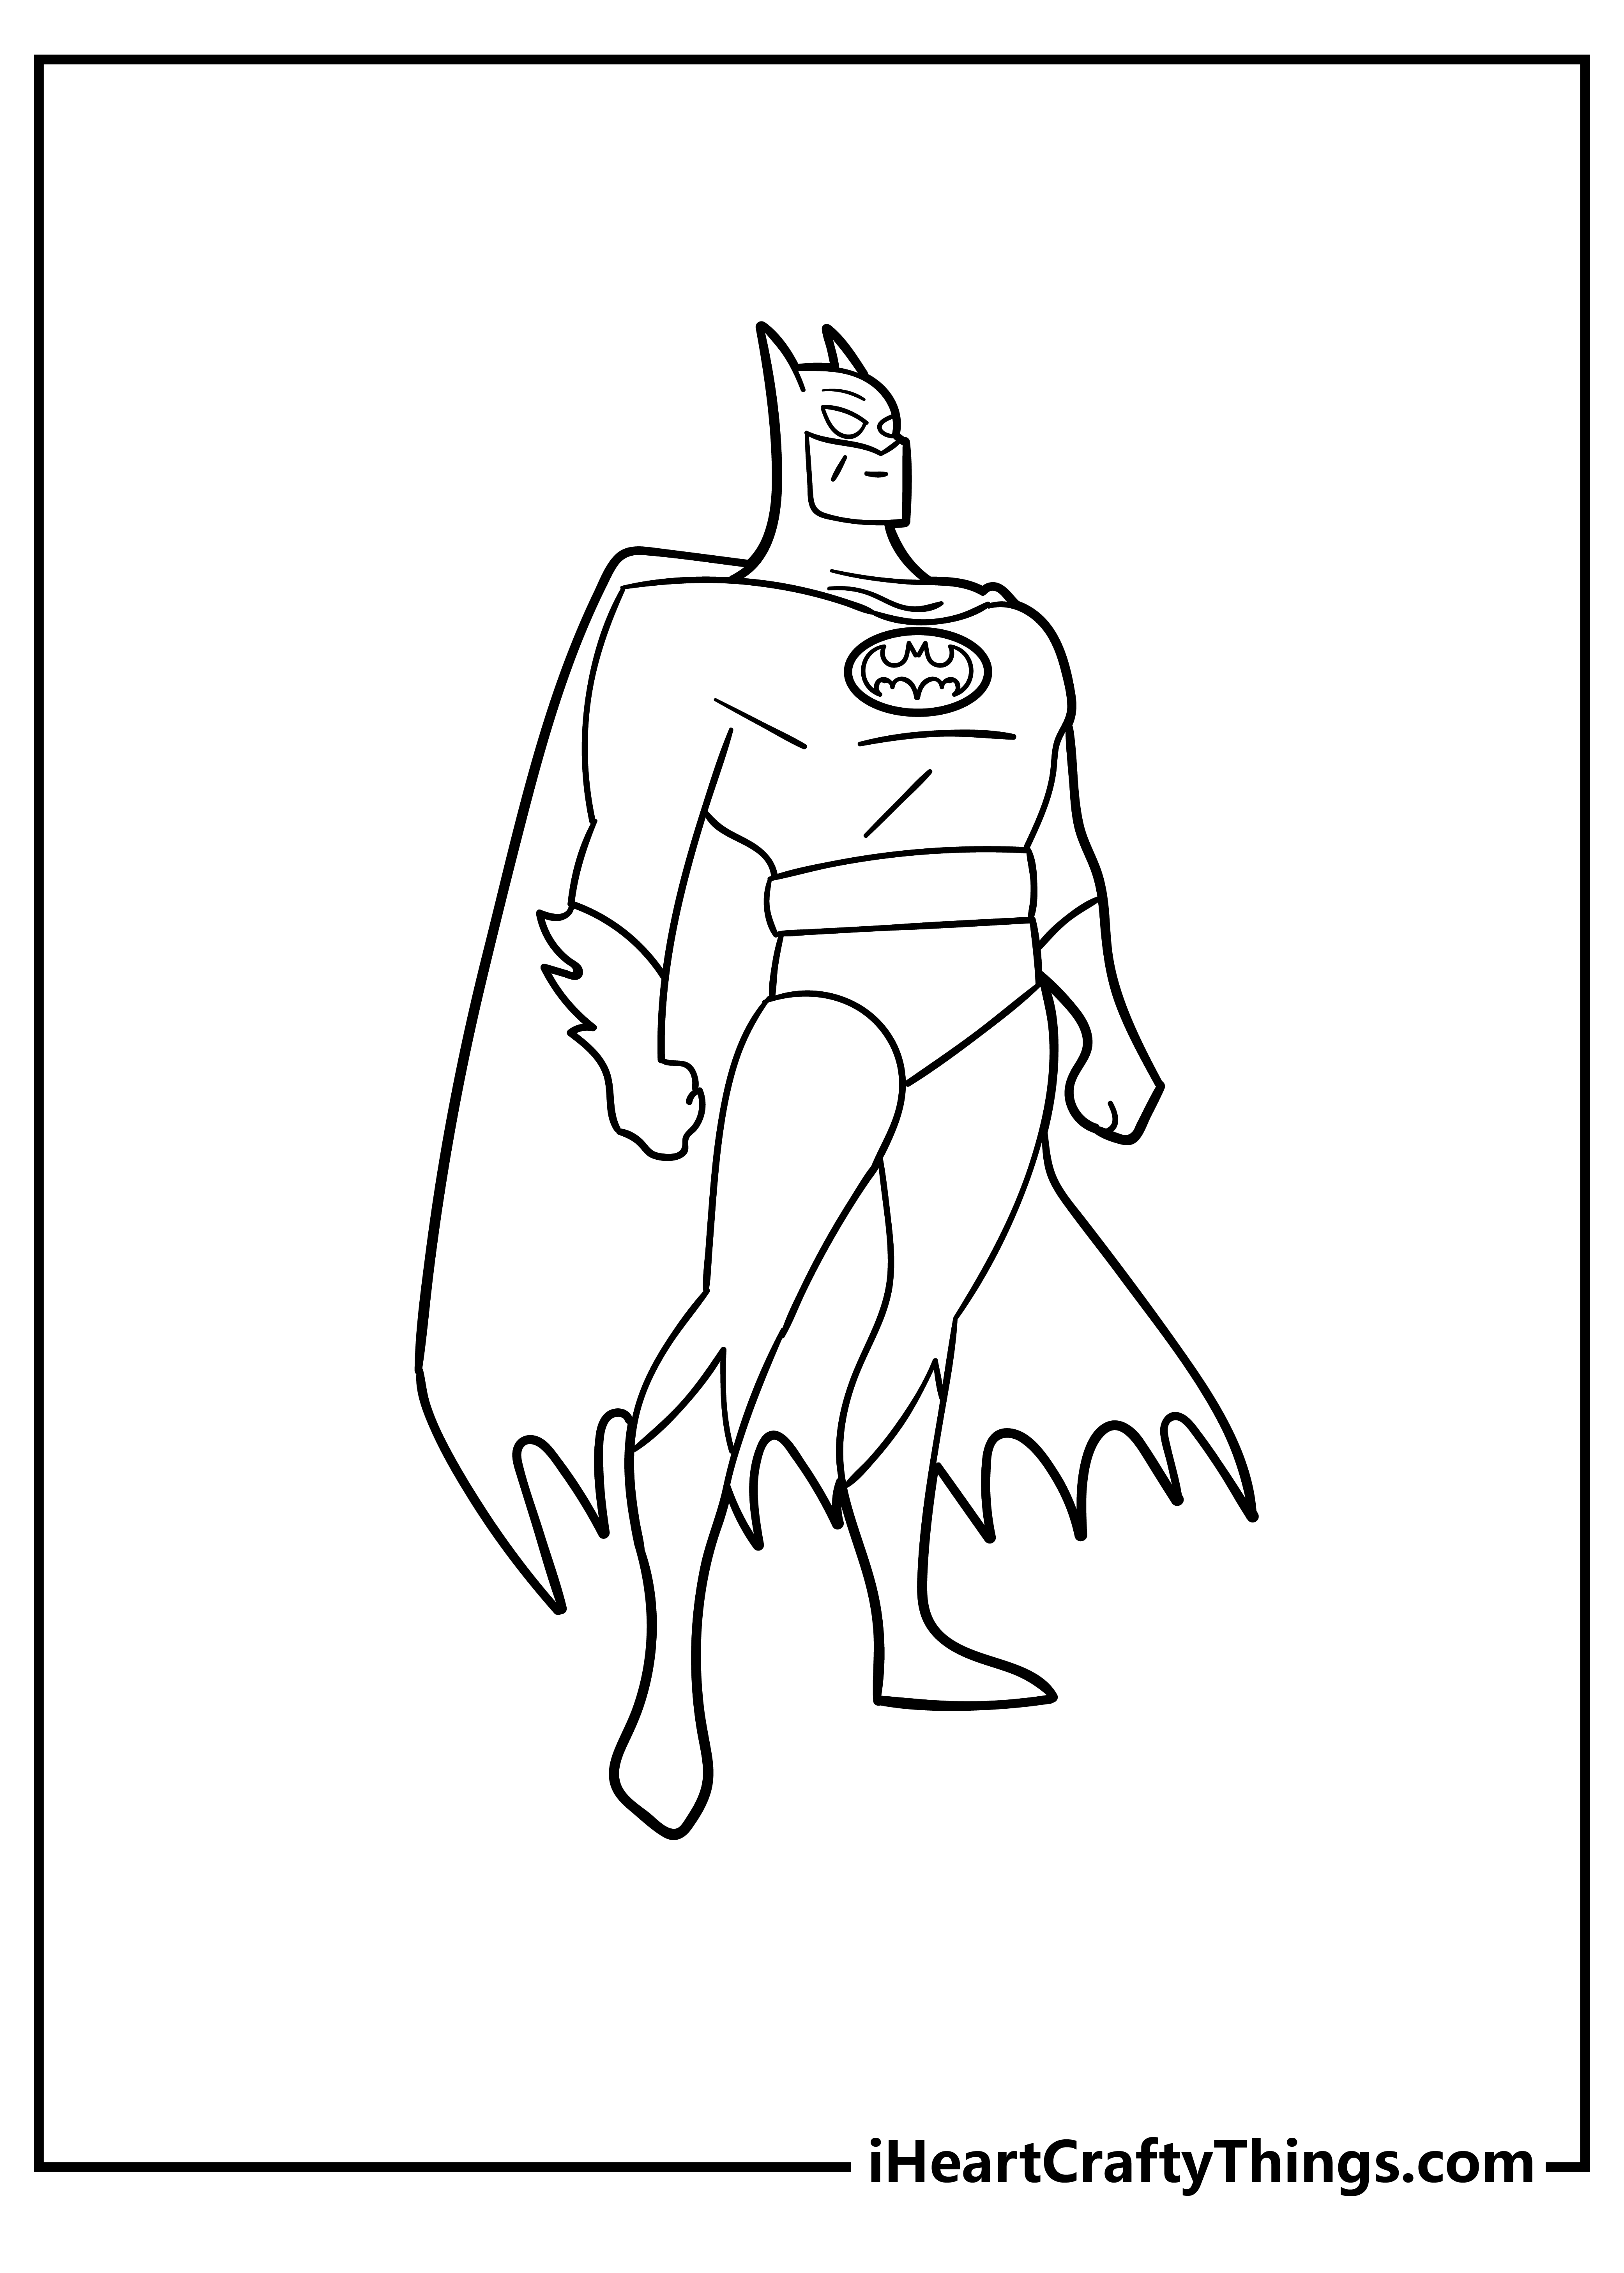 Batman Coloring Pages for kids free download